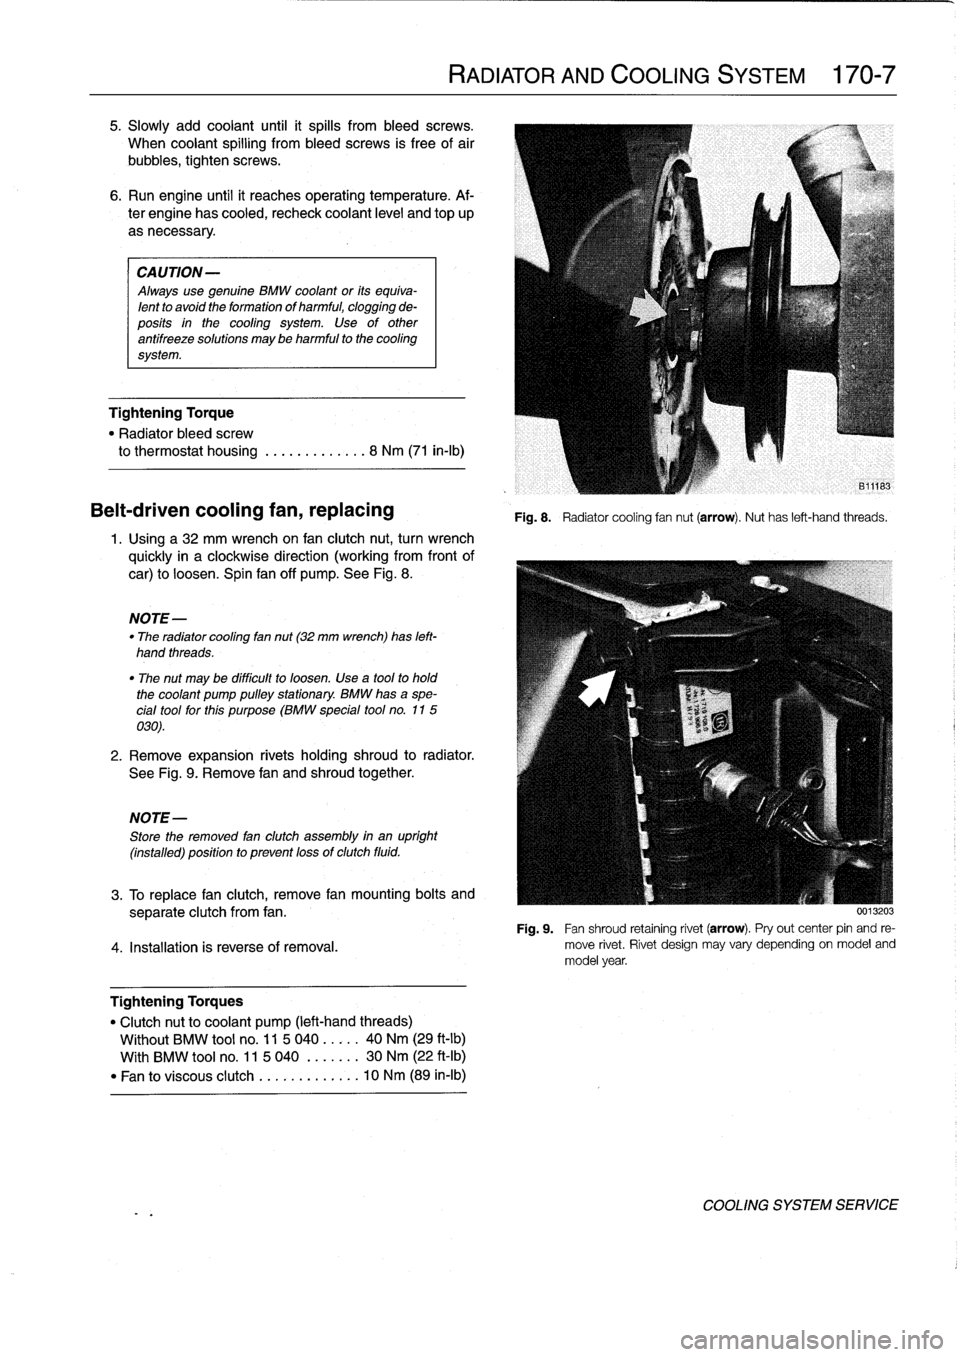 BMW 318i 1998 E36 Workshop Manual 5
.
Slowly
add
coolant
until
it
spills
from
bleed
screws
.

When
coolant
spillíng
from
bleed
screws
is
free
of
air

bubbies,
tighten
screws
.

6
.
Run
engine
until
it
reaches
operatíng
temperature
.